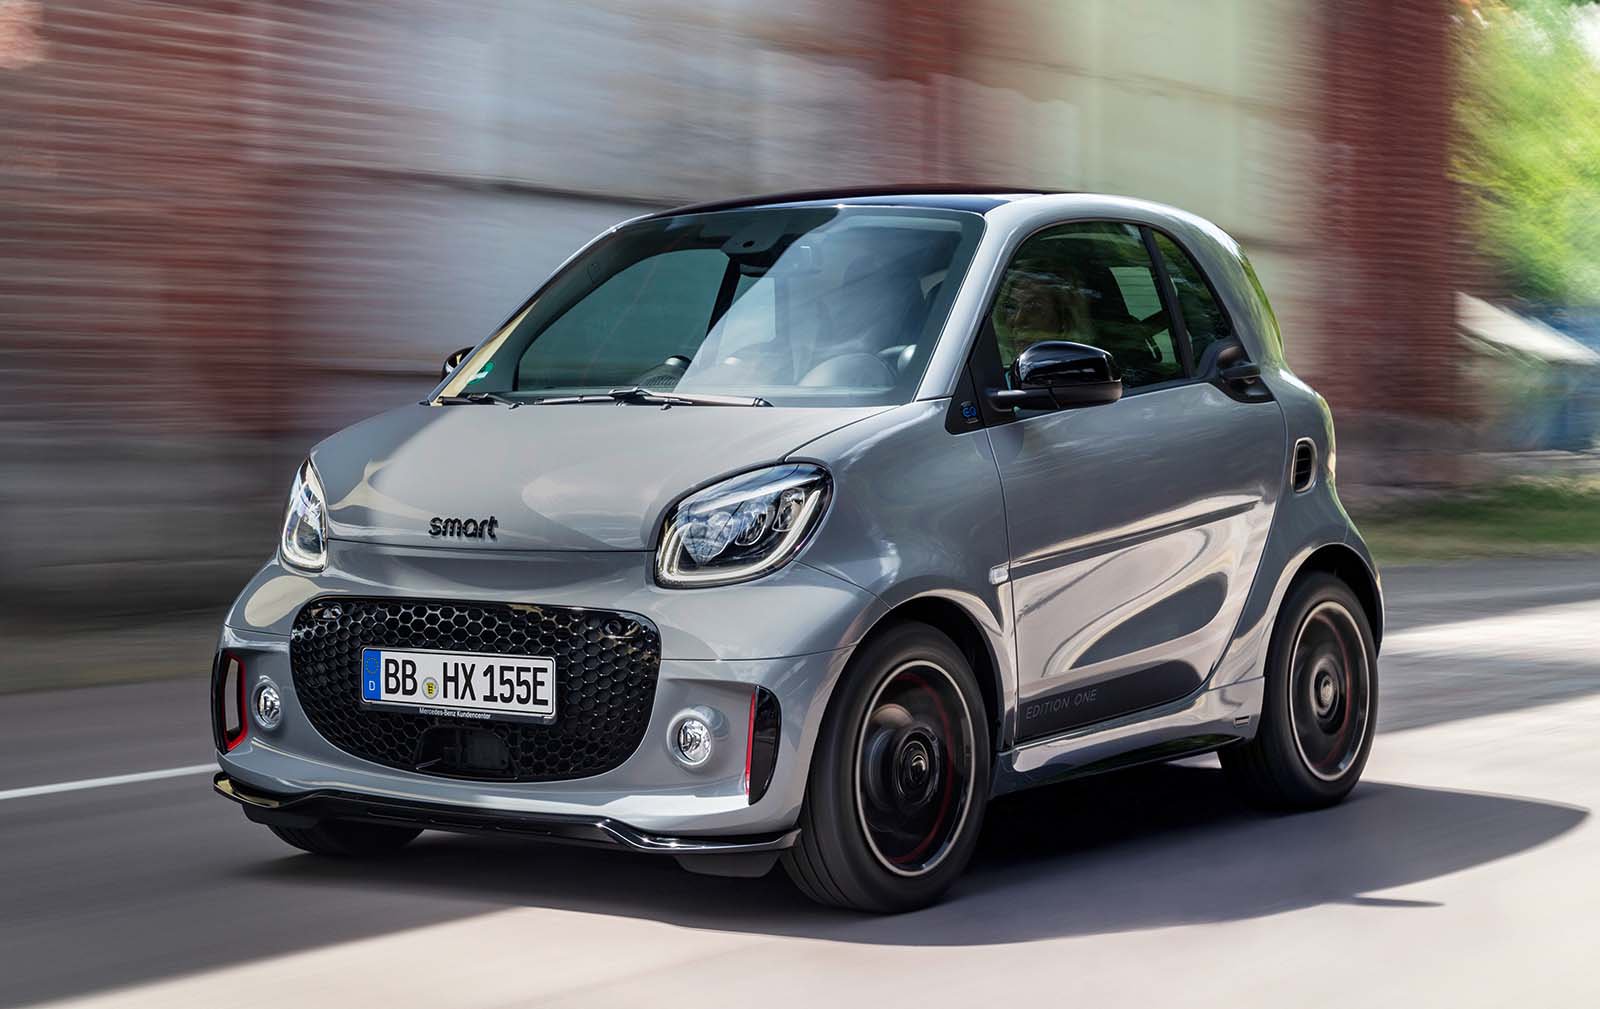 <p><strong>Make</strong> Smart |<strong> Model</strong> Fortwo EQ | <strong>Version</strong> 60kW EQ Premium | <strong>List price</strong> £22,225 | <strong>Target Price</strong> £20,155 | <strong>Target PCP </strong>£241 | <strong>Star rating</strong> 2</p>  <p>The Smart Fortwo EQ is currently the cheapest electric car money can buy, and that's largely thanks to its small size. As a result it's well suited to urban driving, but the poor range and limited practicality make it hard to recommend.</p>  <p><strong>Read our full Smart Fortwo EQ review or see the latest Fortwo EQ deals >></strong></p>